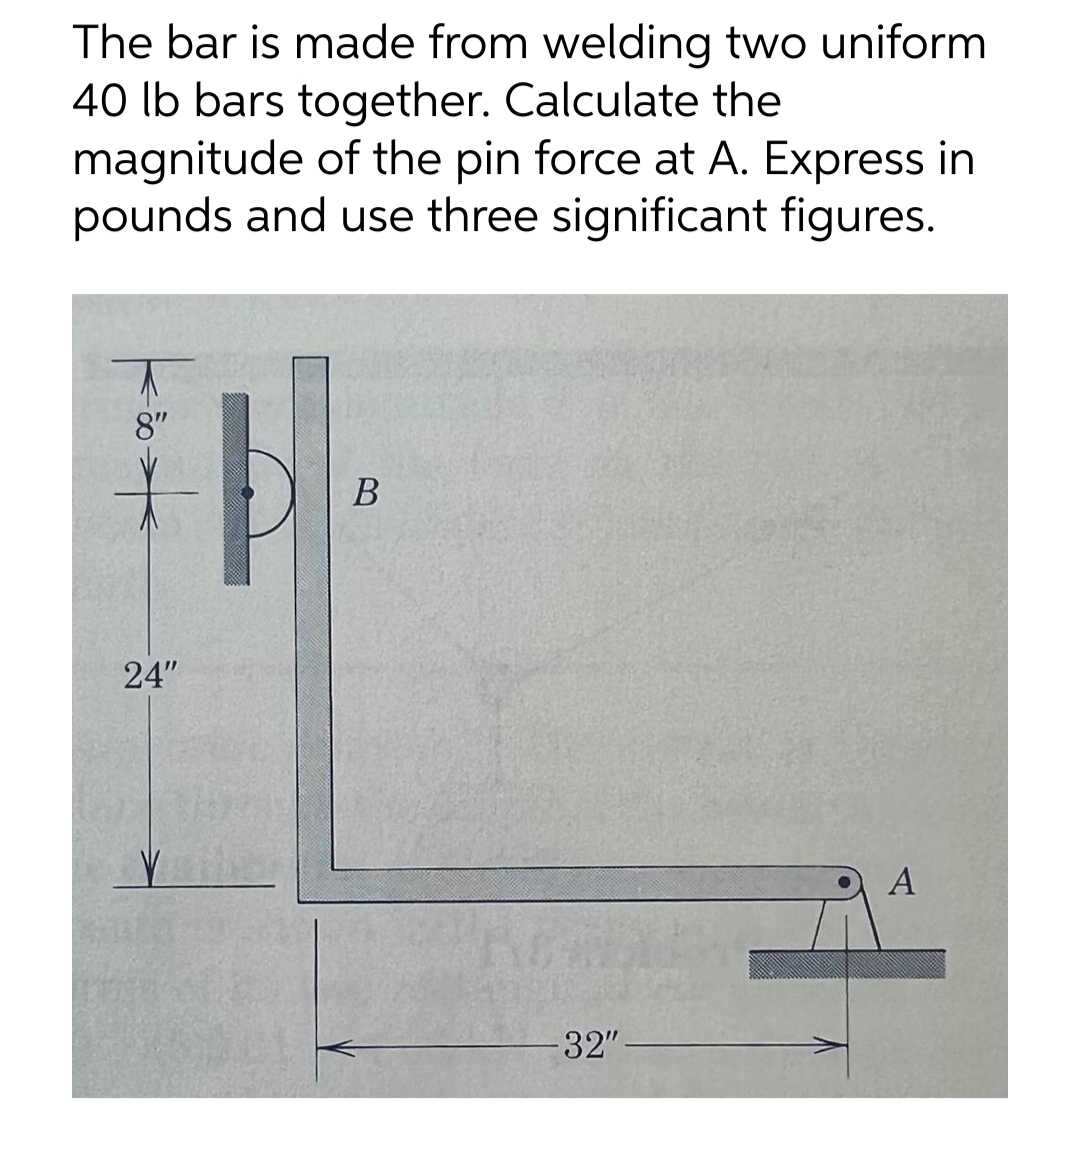 The bar is made from welding two uniform
40 lb bars together. Calculate the
magnitude of the pin force at A. Express in
pounds and use three significant figures.
8"
24"
B
32"
A